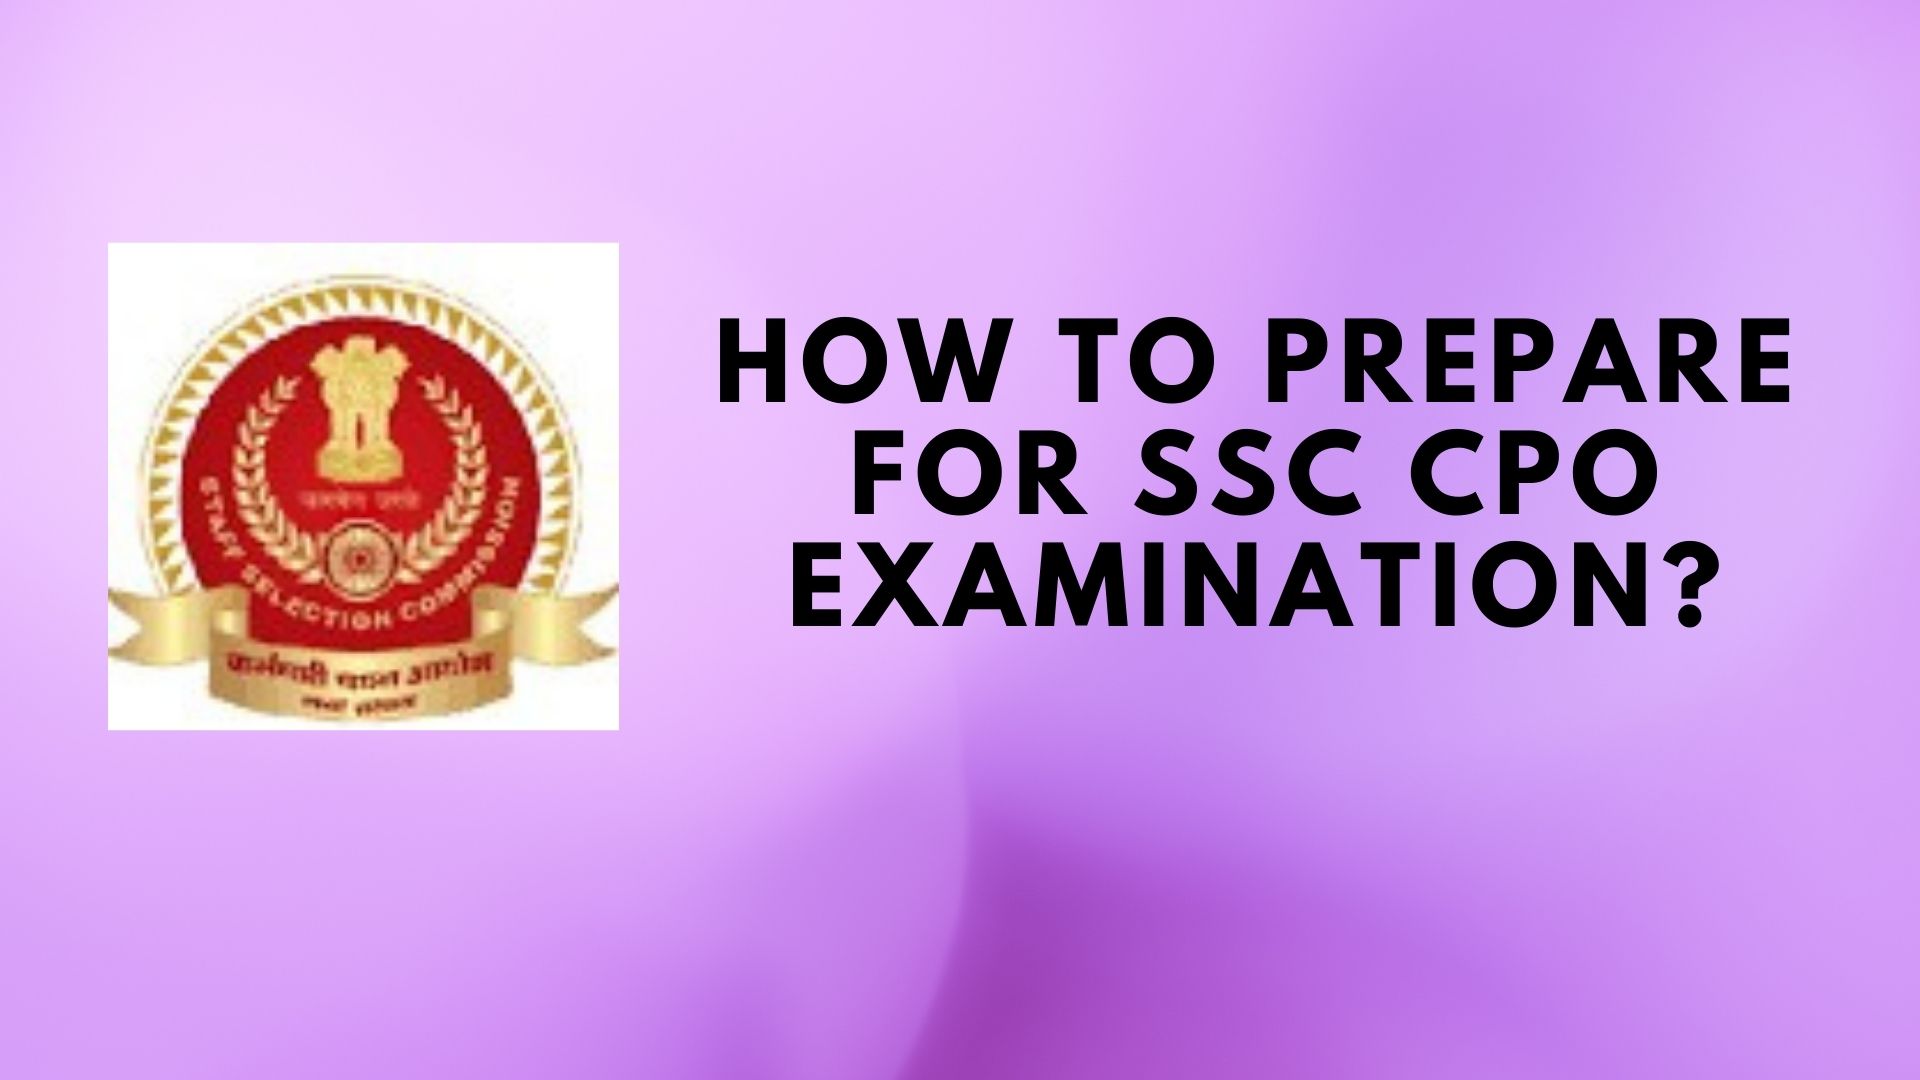 How to Prepare for SSC CPO examination